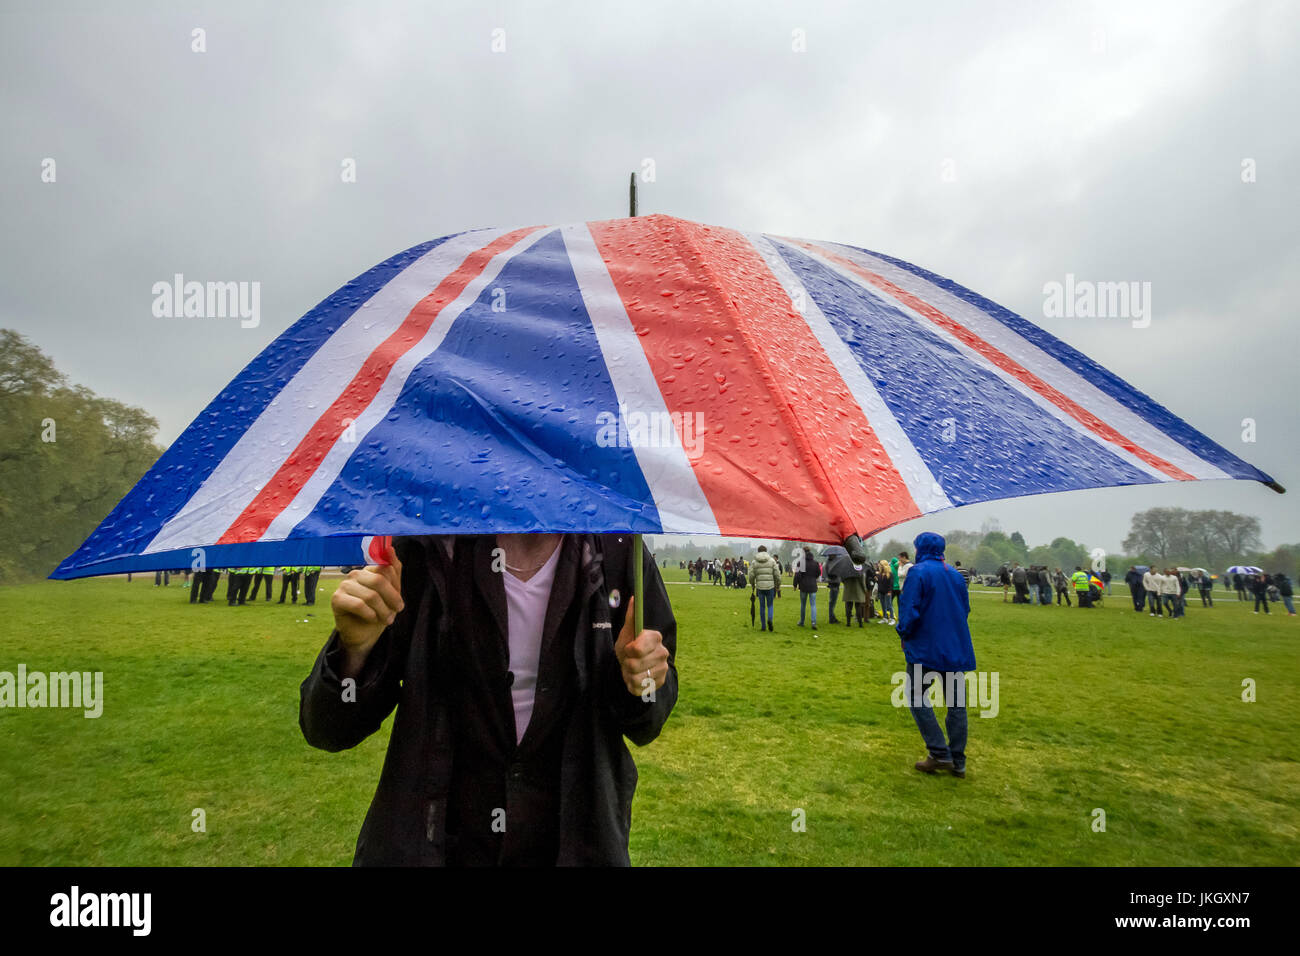 British union flag umbrella during rain and wet weather in London's Hyde Park. Stock Photo